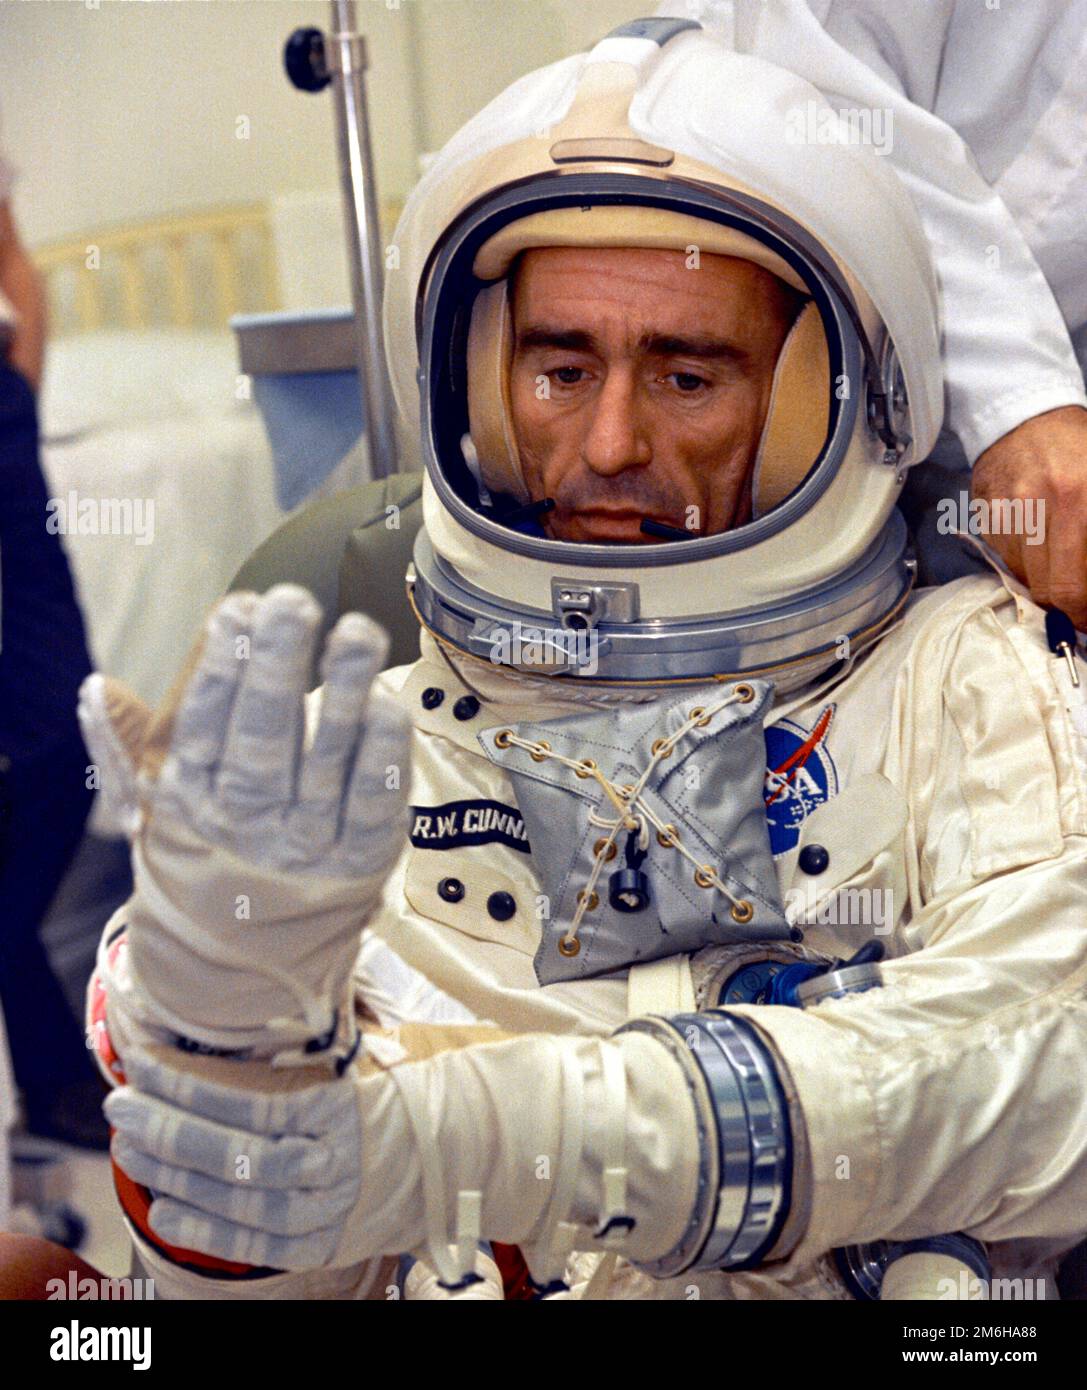 Houston, United States. 29 December, 1966. Houston, United States. 29 December, 1966. NASA astronaut Walter Cunningham, lunar module pilot for the Apollo 7 mission, suits up for Altitude Chamber Test at the Johnson Space Center, December 29, 1966 in Houston, Texas. Cunningham died January 4, 2023 at 90-years-old, the last surviving member of the NASA Apollo 7 mission. Stock Photo